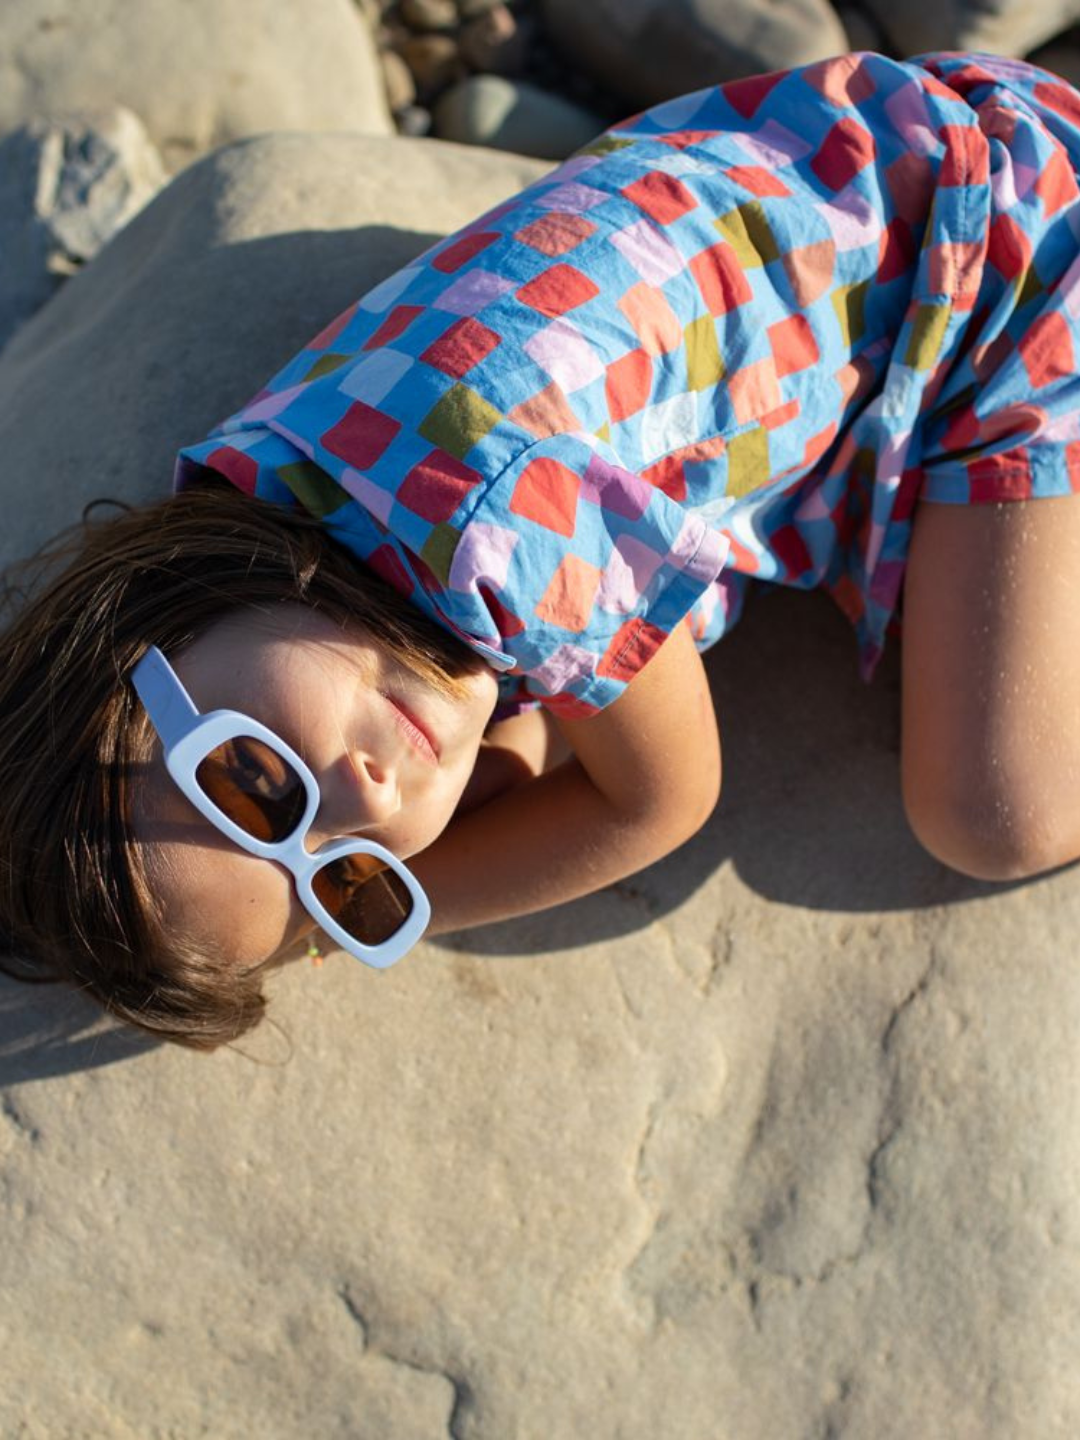 A child lying on a rock wearing a kids' shirt and shorts set in a pattern of red, orange, pink, lilac and green squares on a blue background